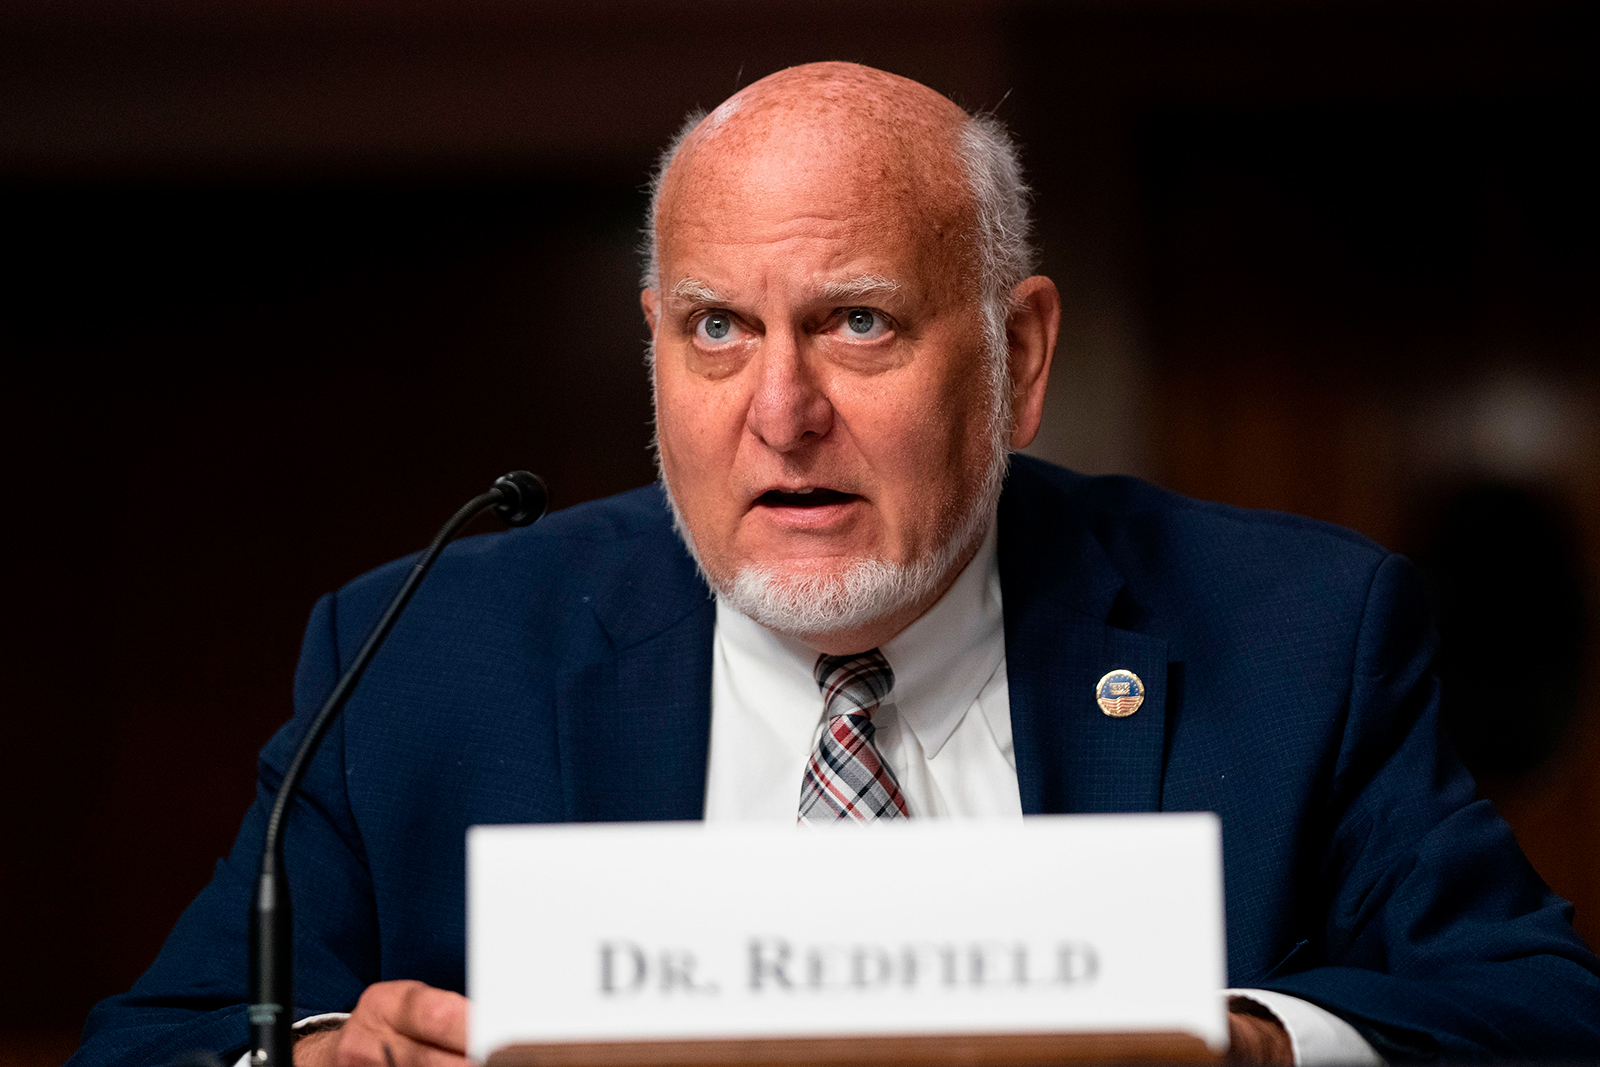 Dr. Robert Redfield, director of the US Centers for Disease Control and Prevention, testifies during a US Senate Senate Health, Education, Labor, and Pensions Committee hearing on Wednesday.